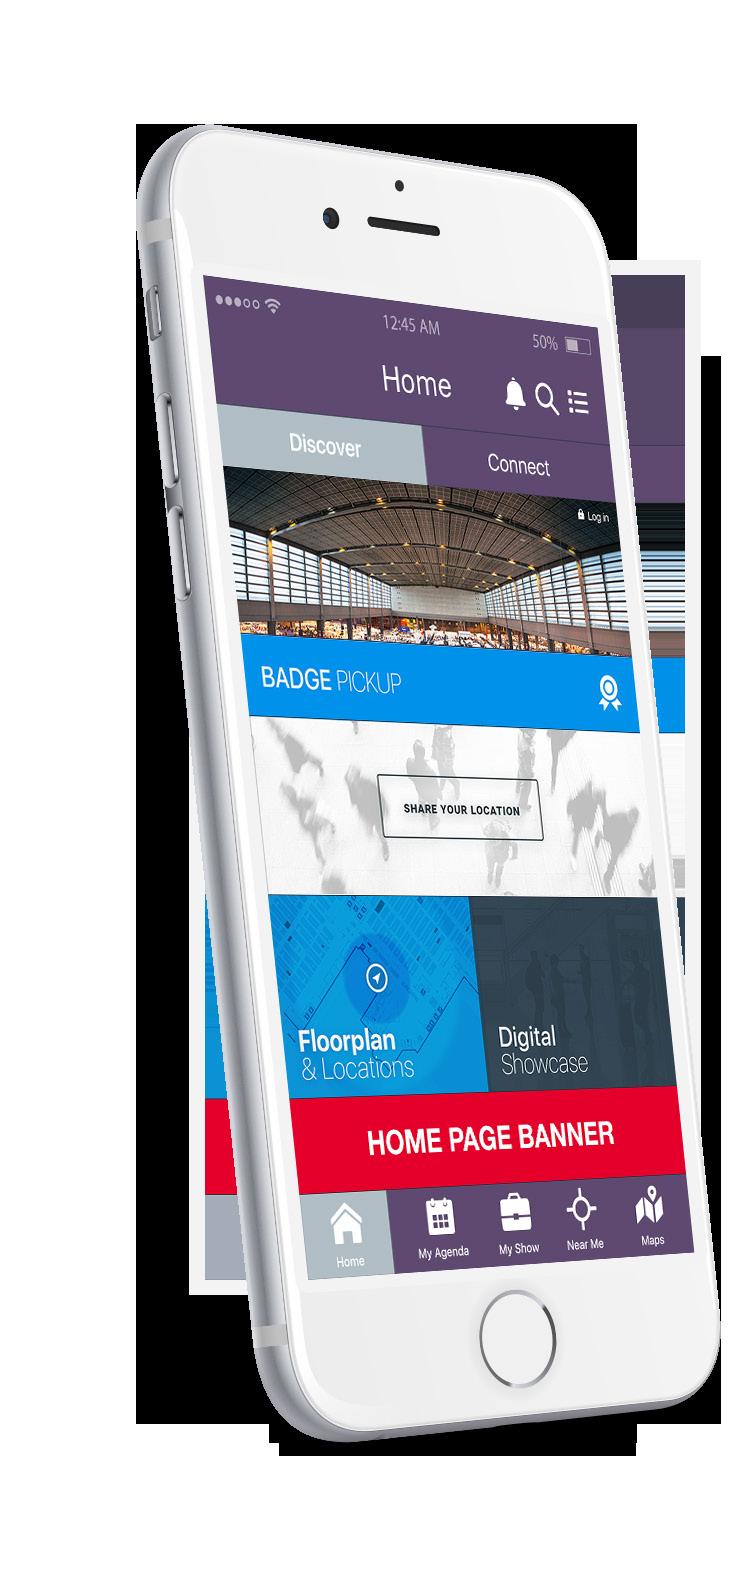 $ 4,000 HOME PAGE BANNERS OUR MOST EXCLUSIVE VISIBILITY Home Page Banners are displayed on the KBIS Mobile App home page